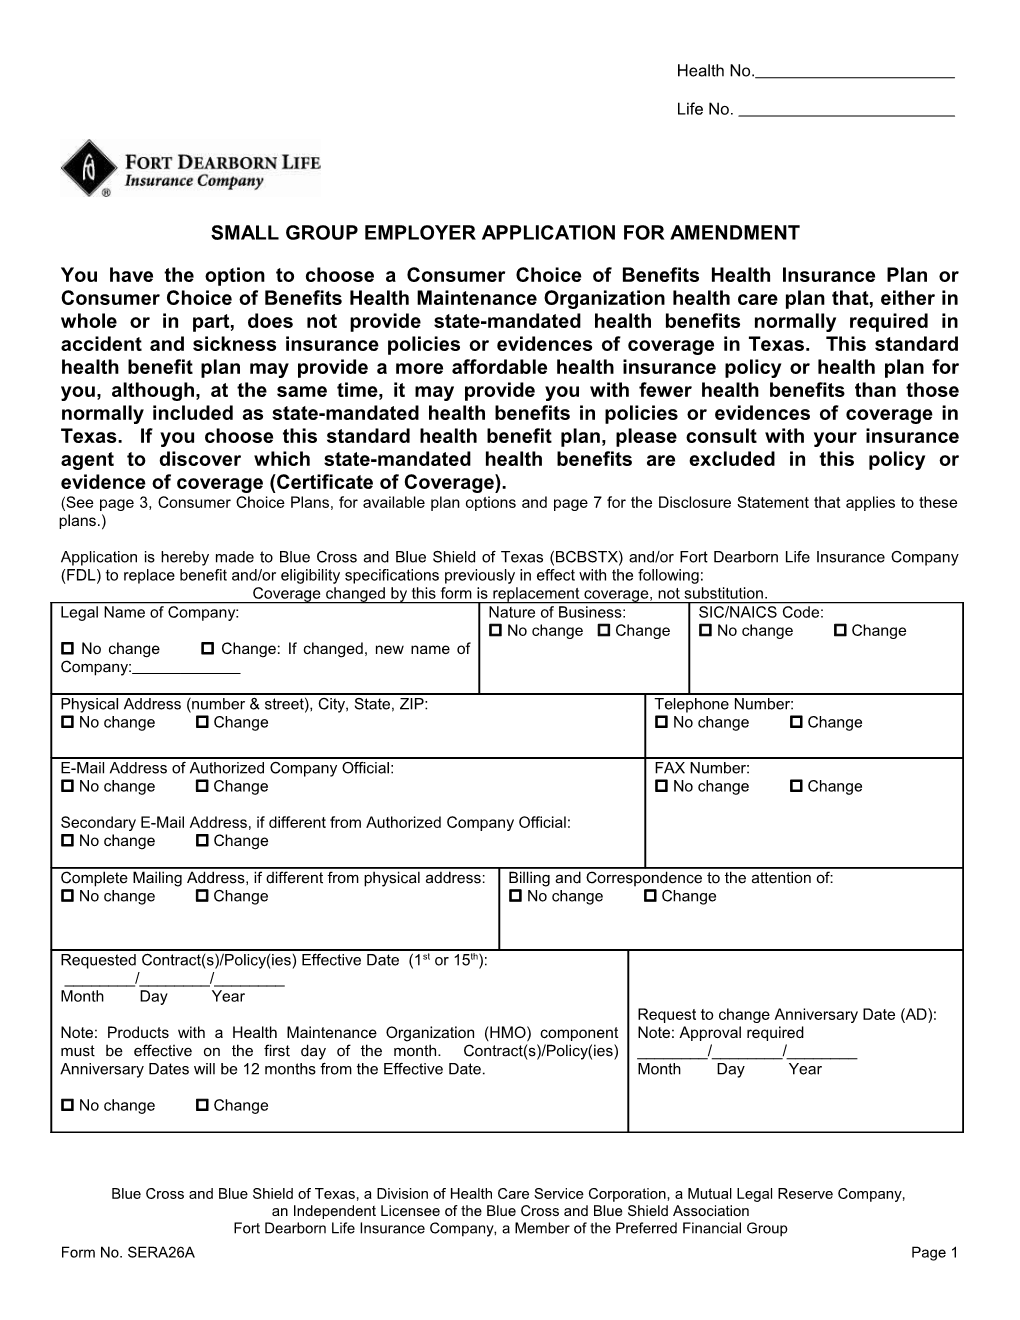 Small Group Employer Application